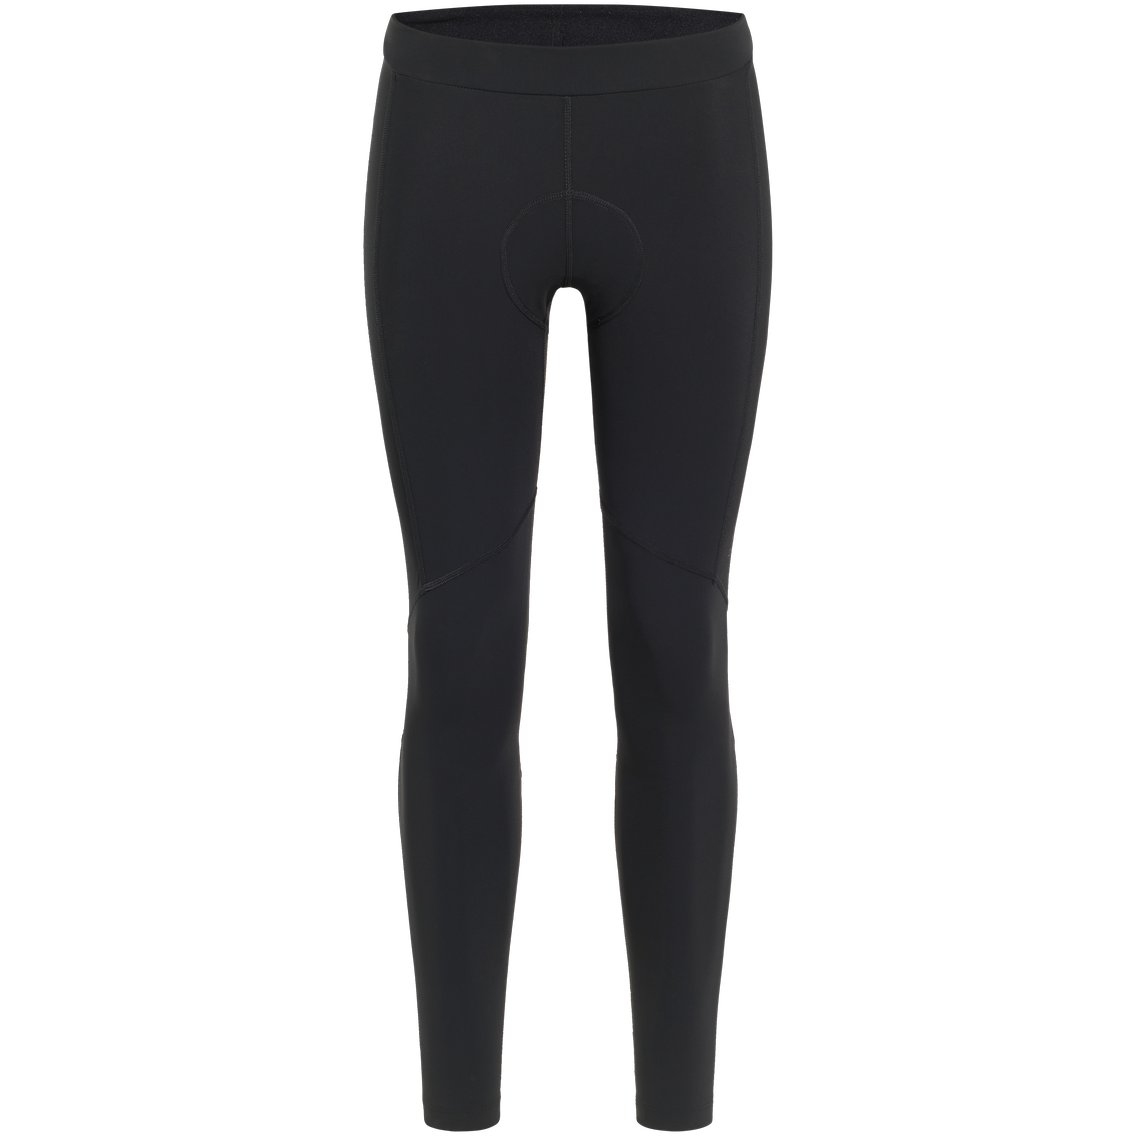 Picture of Odlo Zeroweight Warm Cycling Tights Men - black